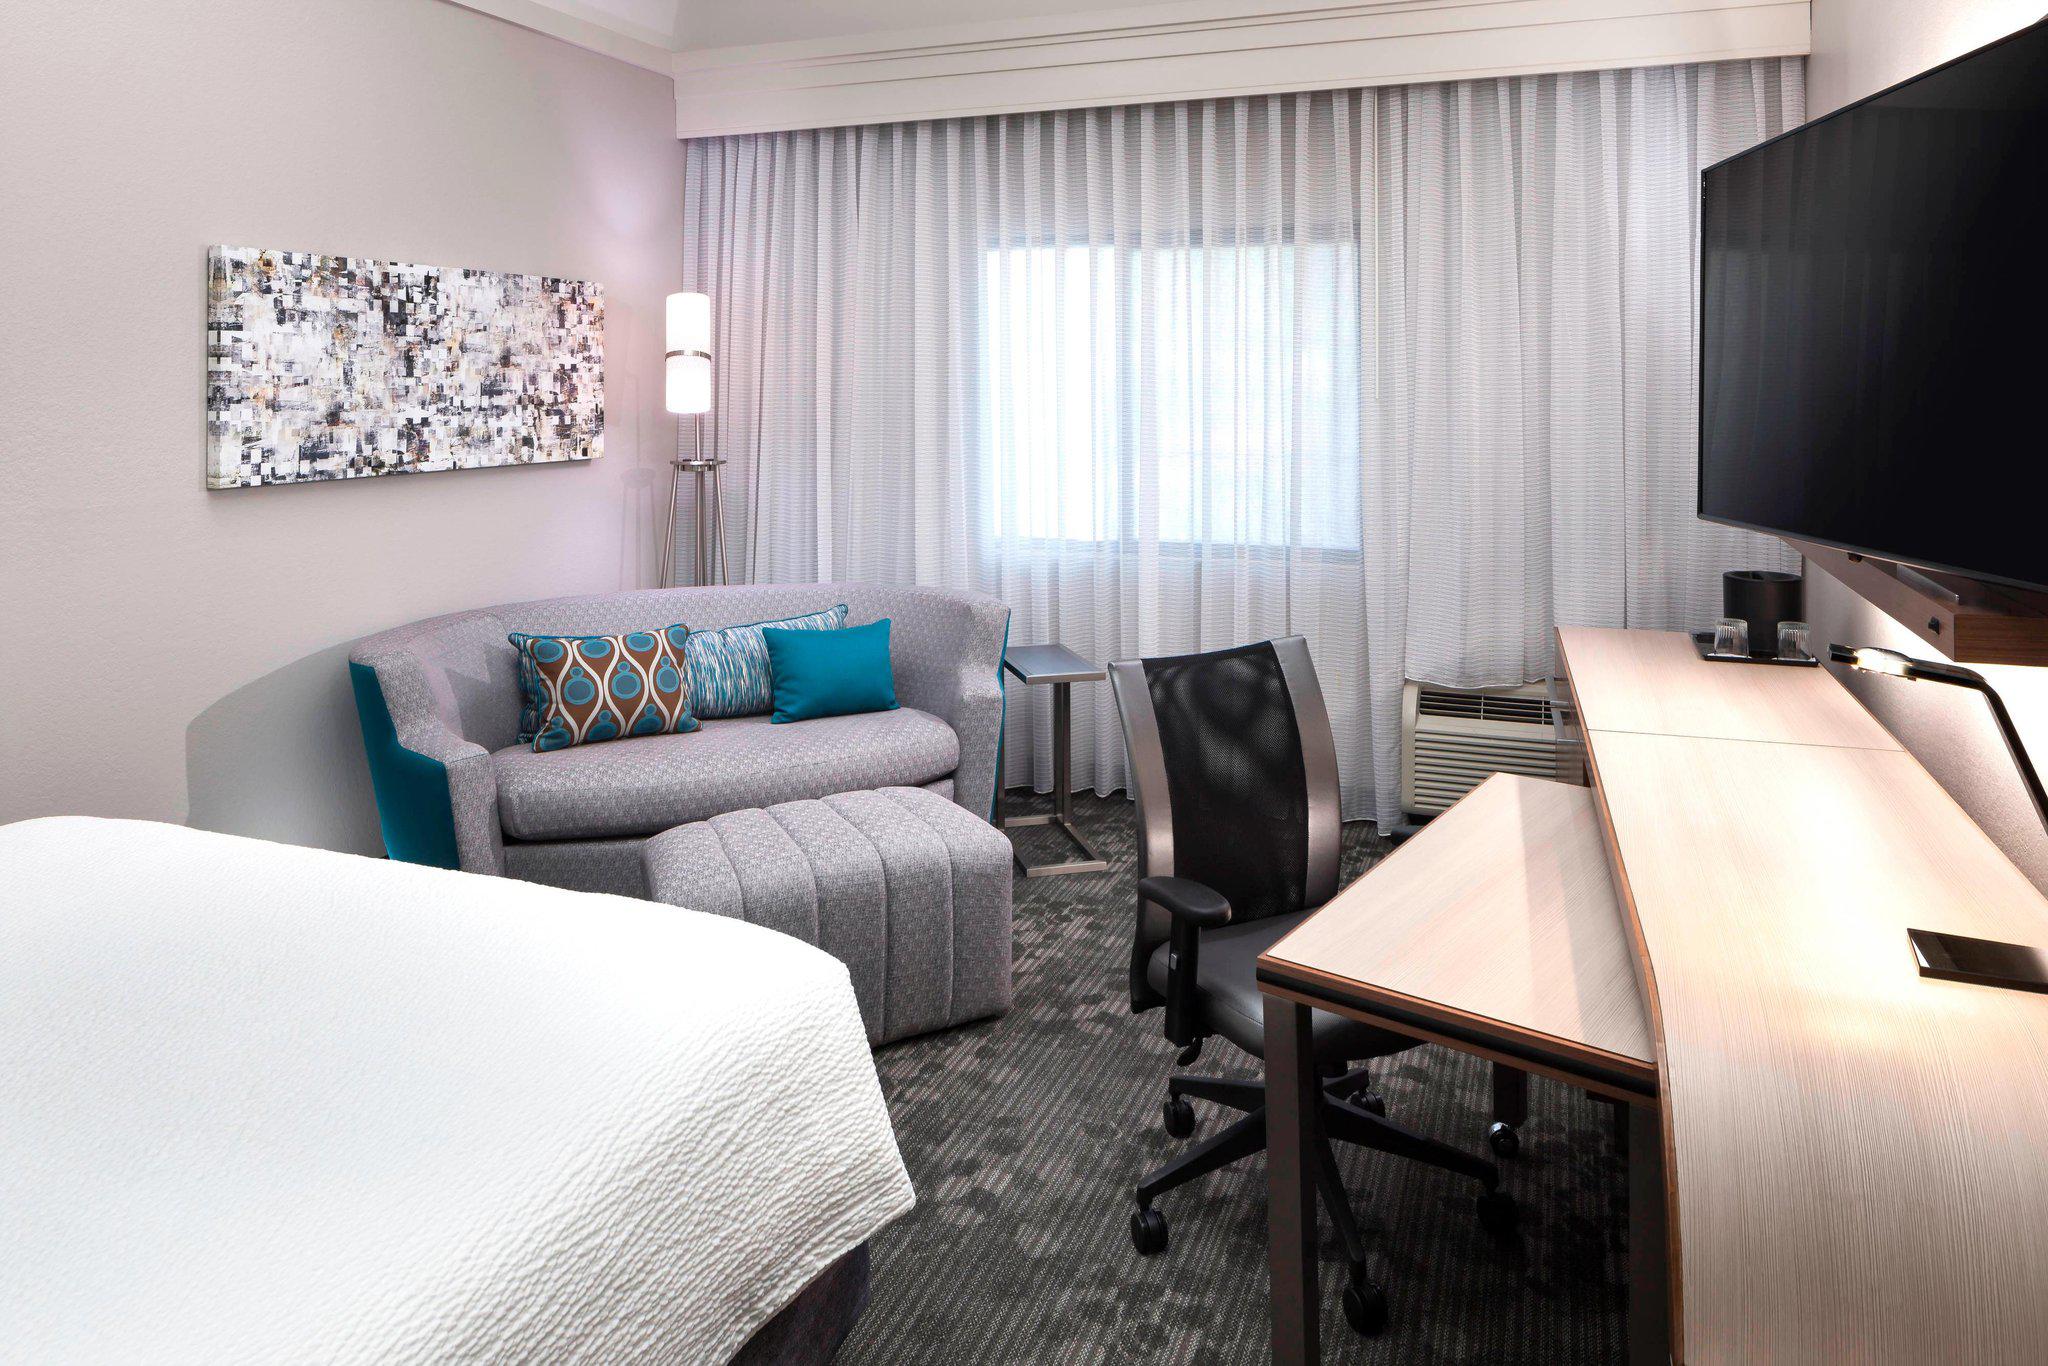 Courtyard by Marriott Pensacola Photo